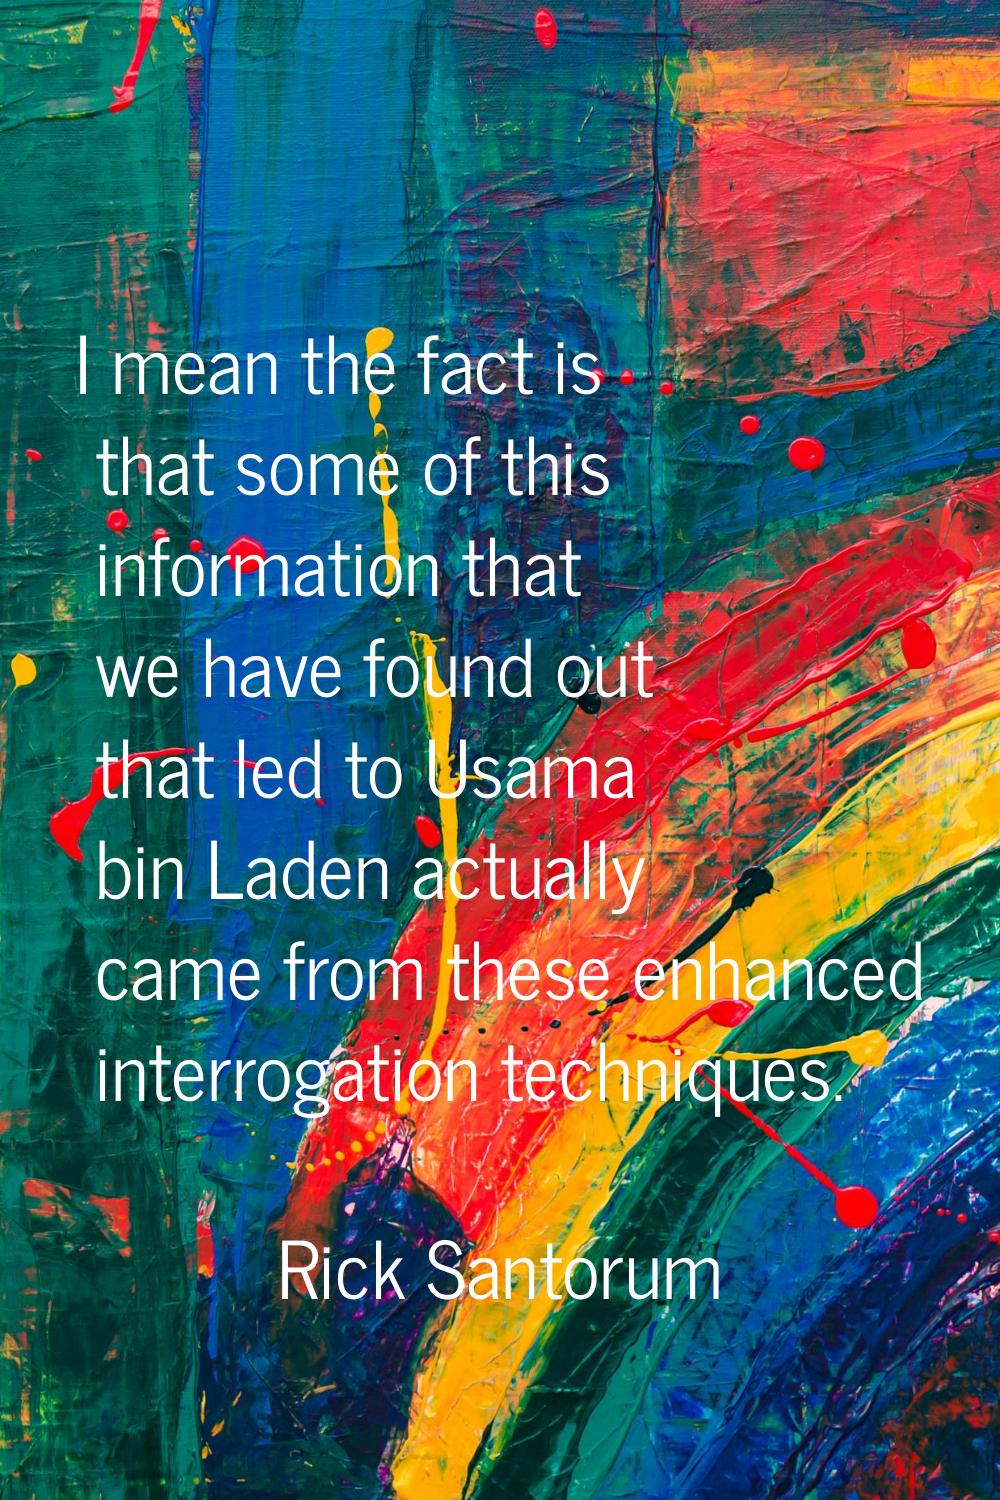 I mean the fact is that some of this information that we have found out that led to Usama bin Laden